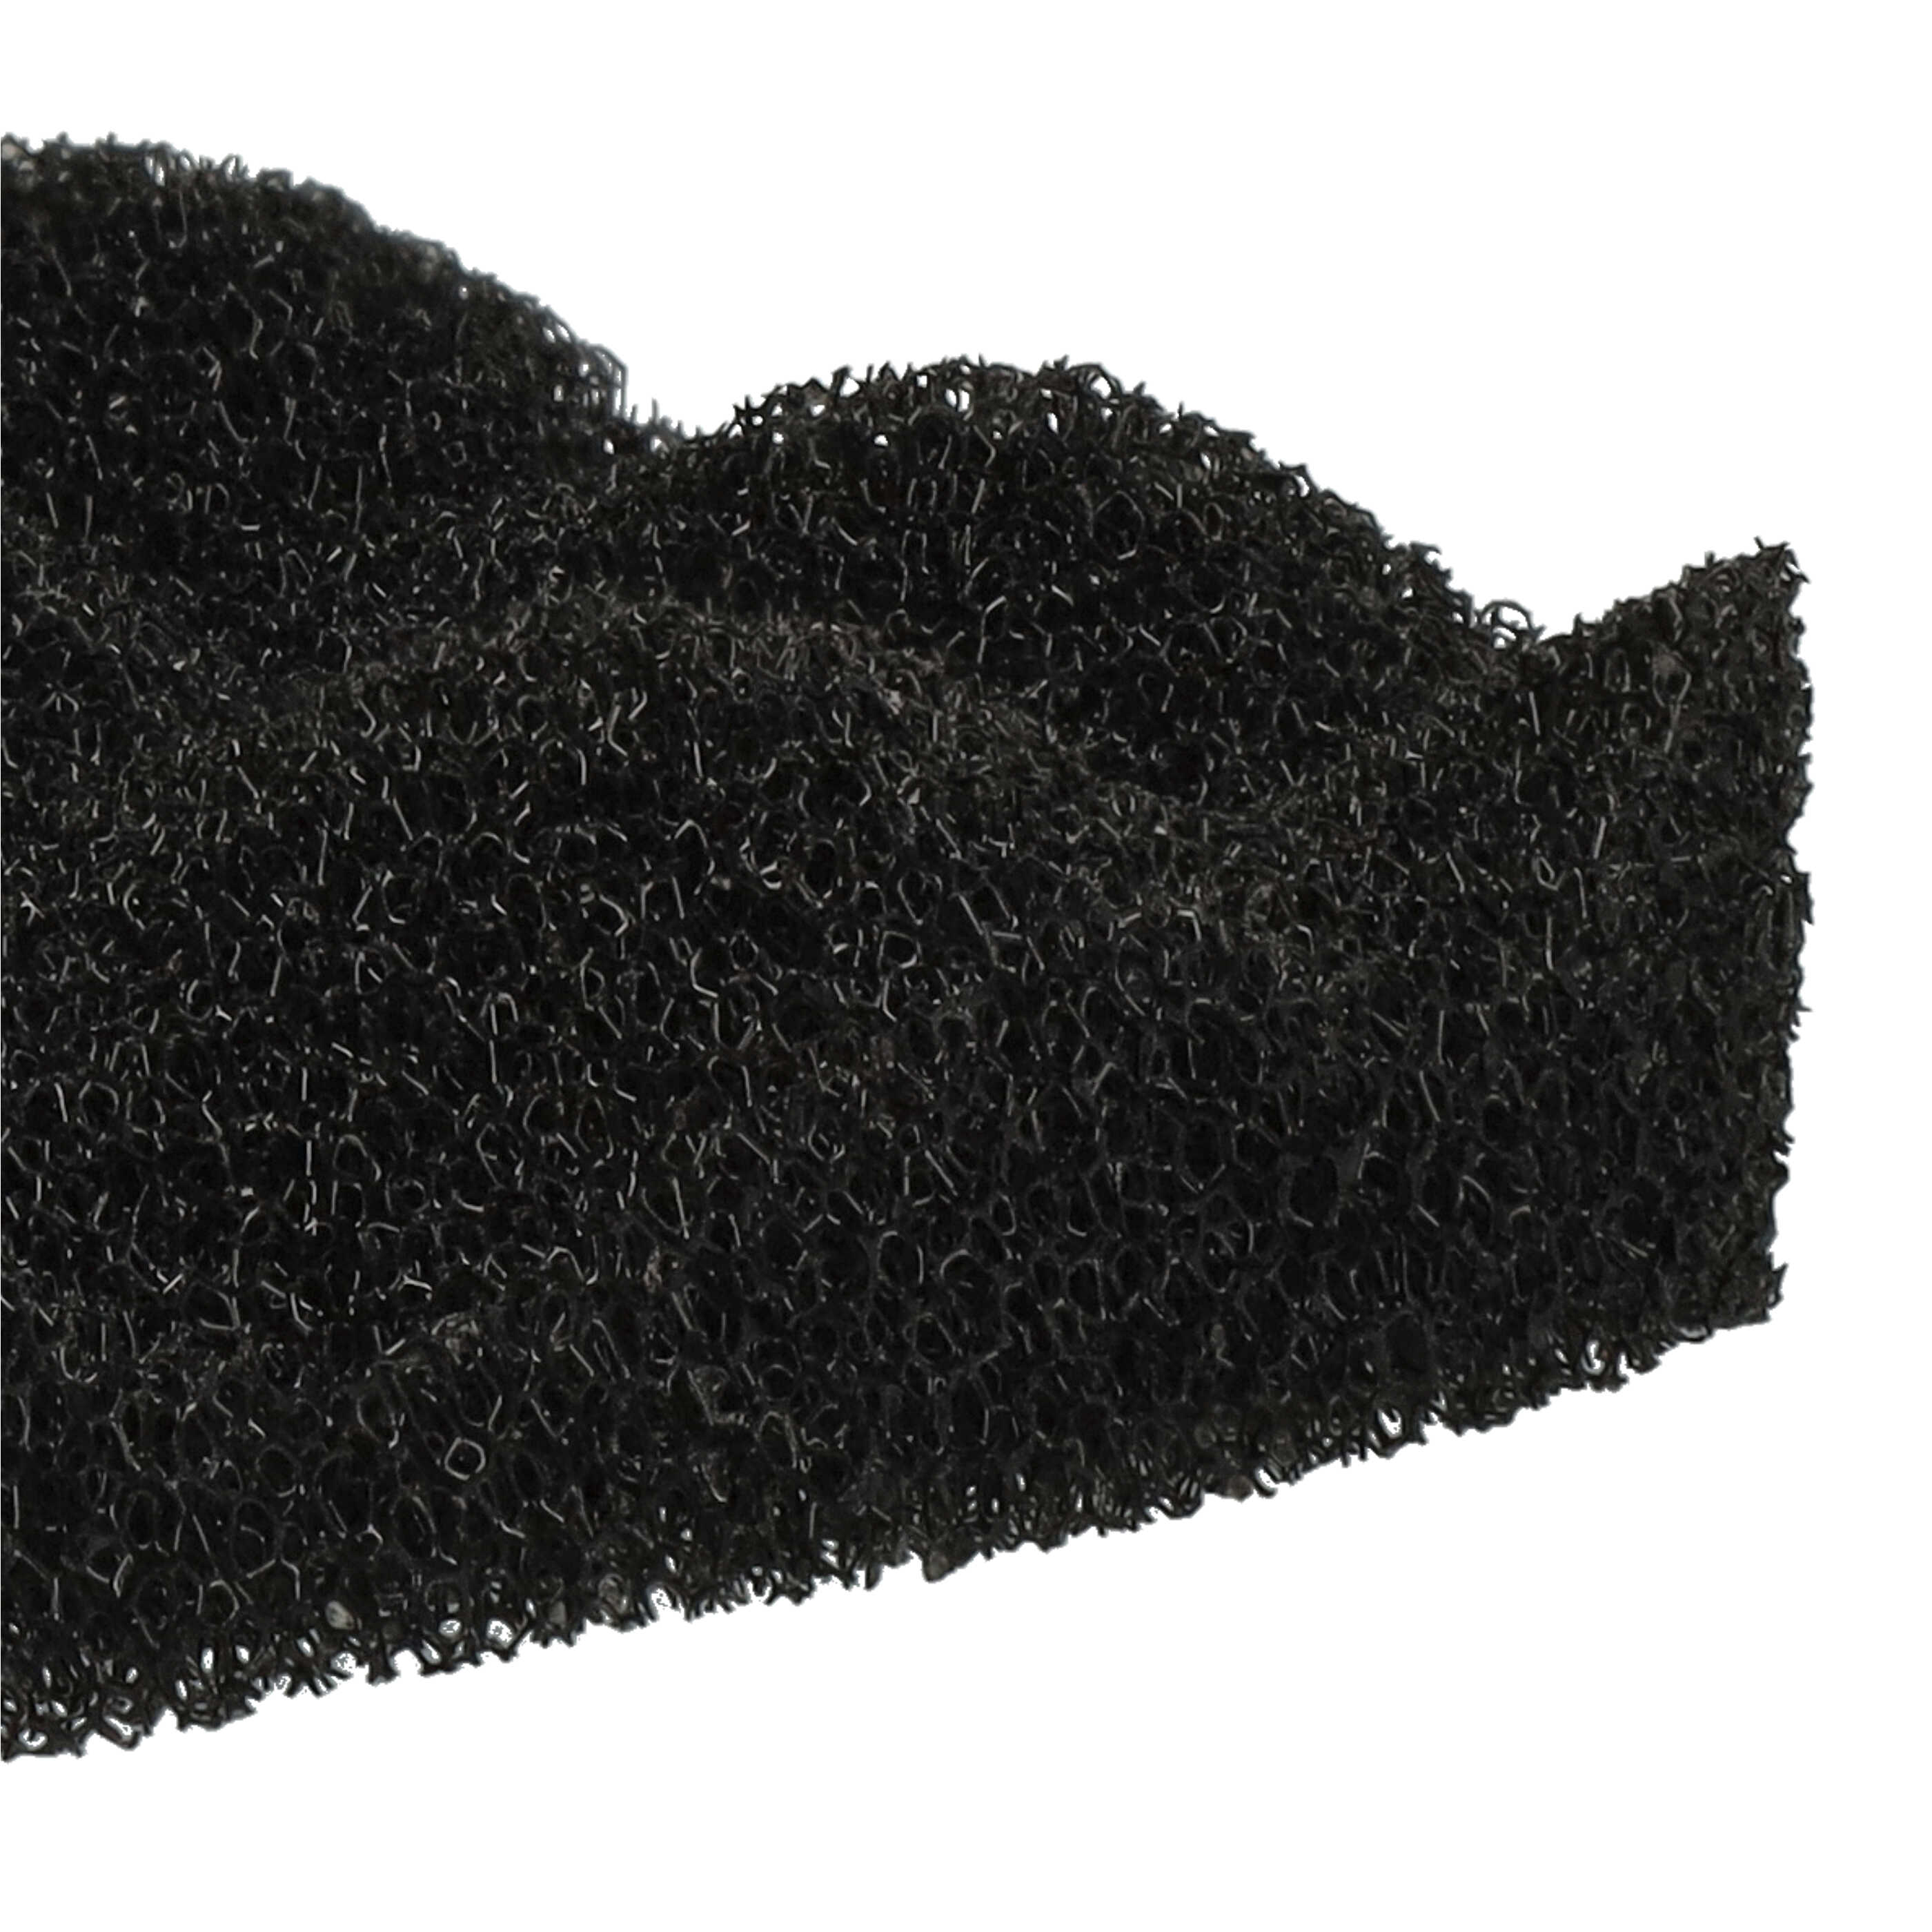 1x foam filter replaces Rowenta RS-RT2241 for Moulinex Vacuum Cleaner